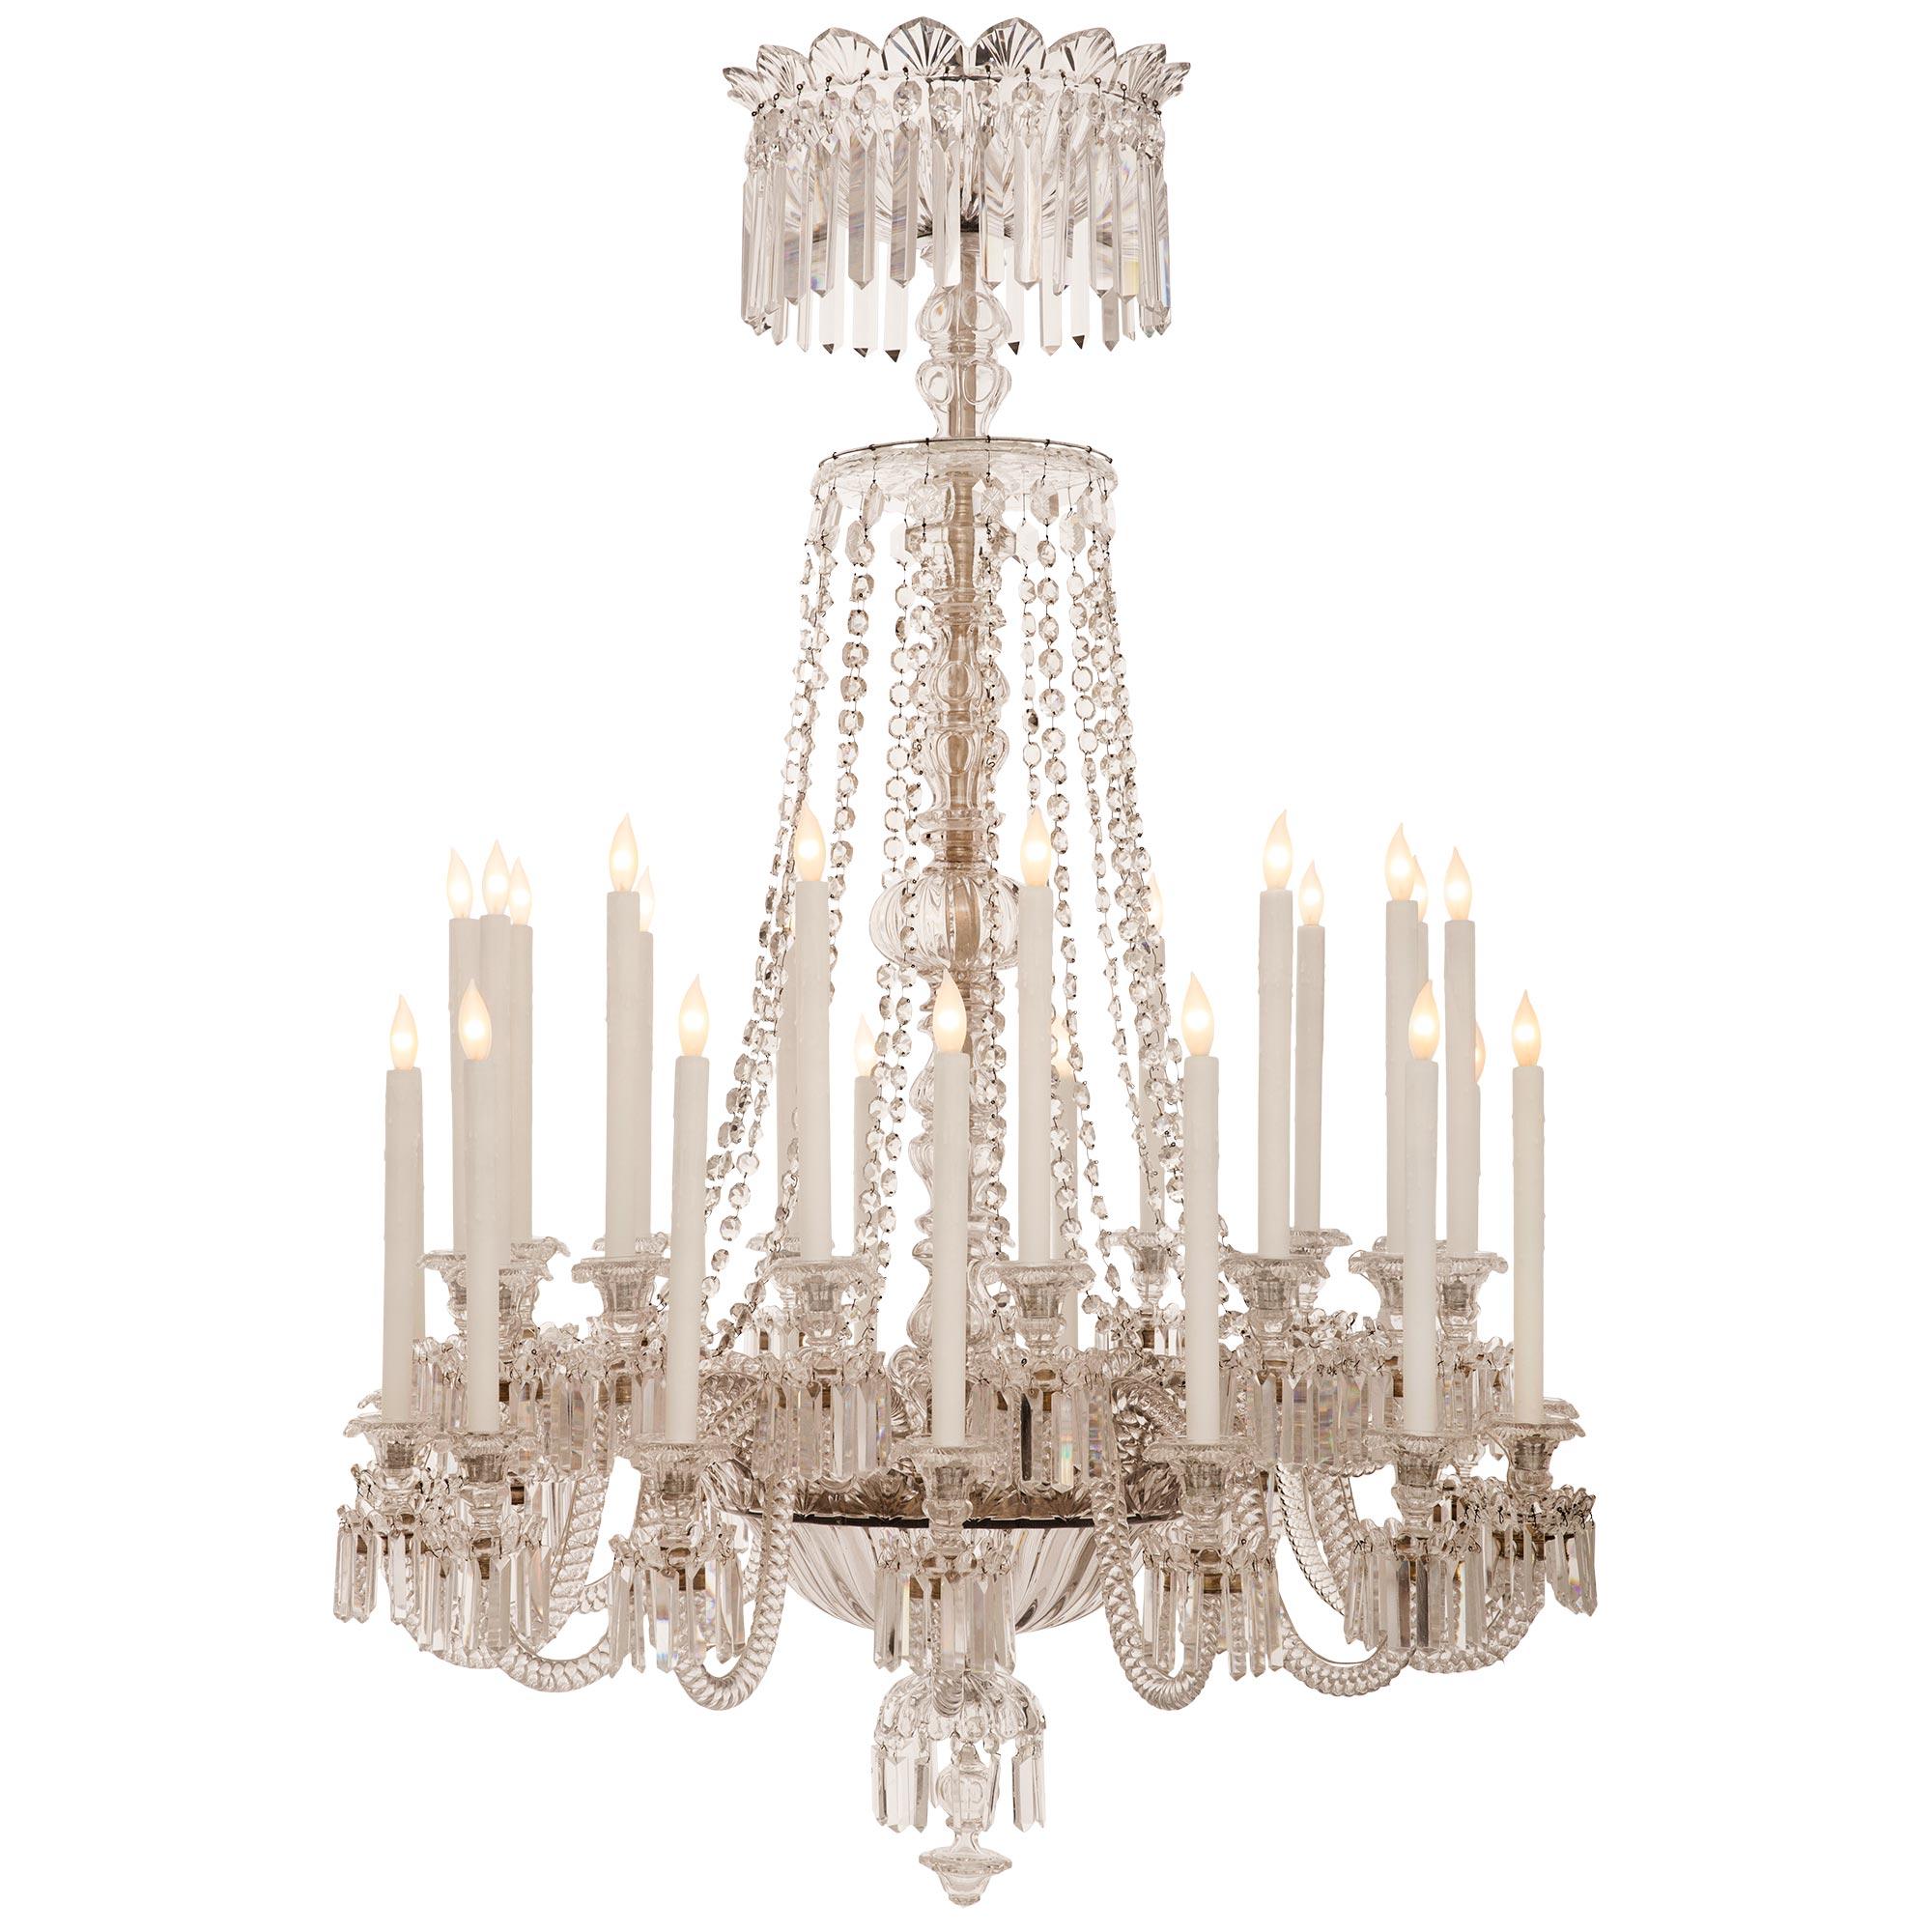 French 19th Century Louis XVI St. Baccarat Crystal Chandelier In Good Condition For Sale In West Palm Beach, FL